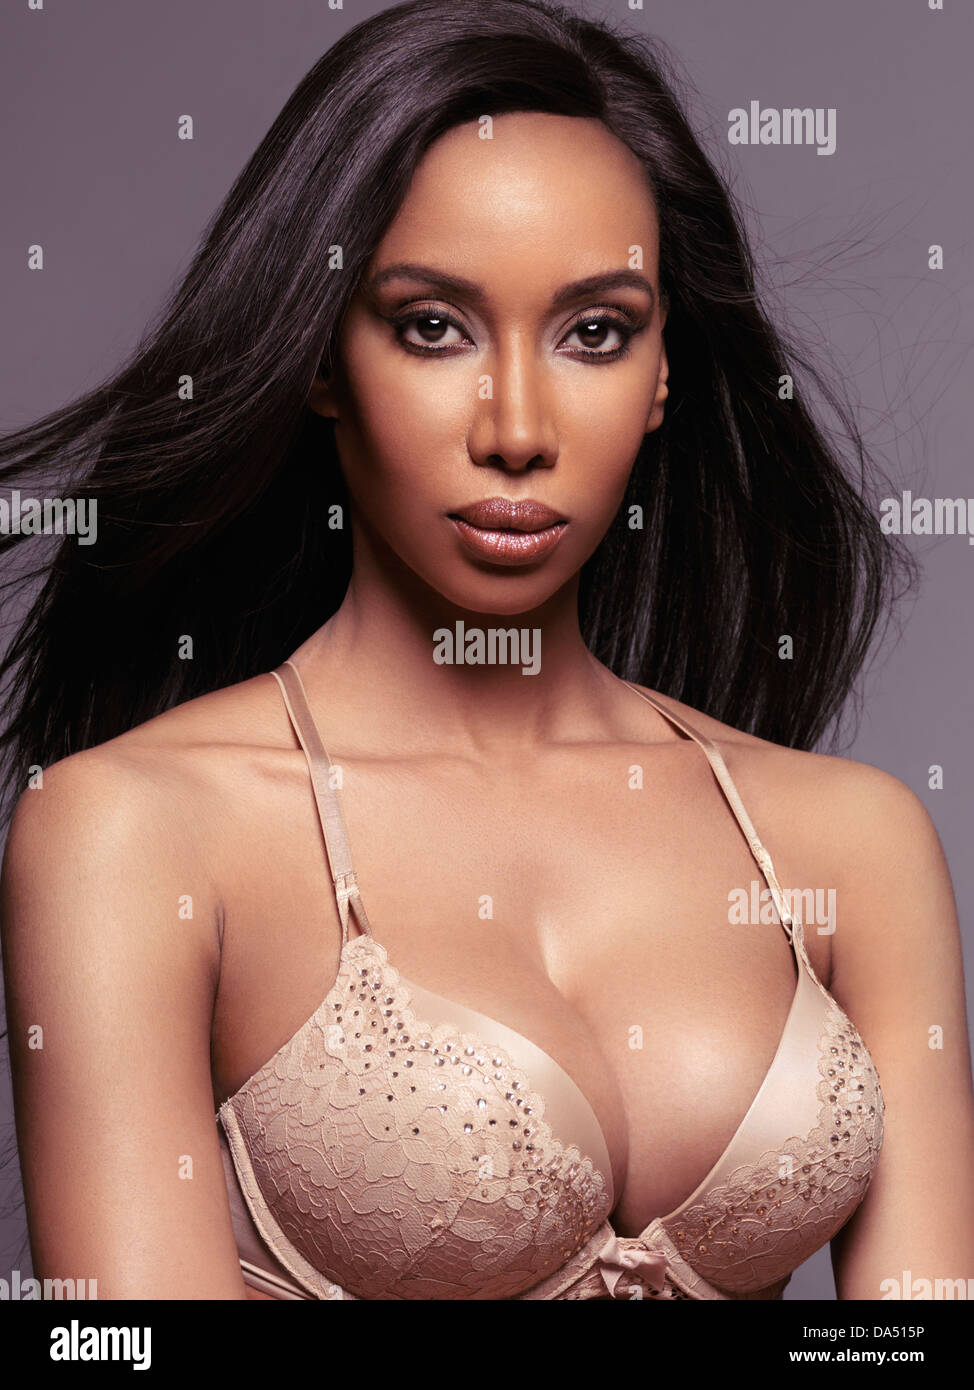 License and prints at MaximImages.com - Beauty portrait of glamorous black woman with long straight hair wearing lingerie Stock Photo